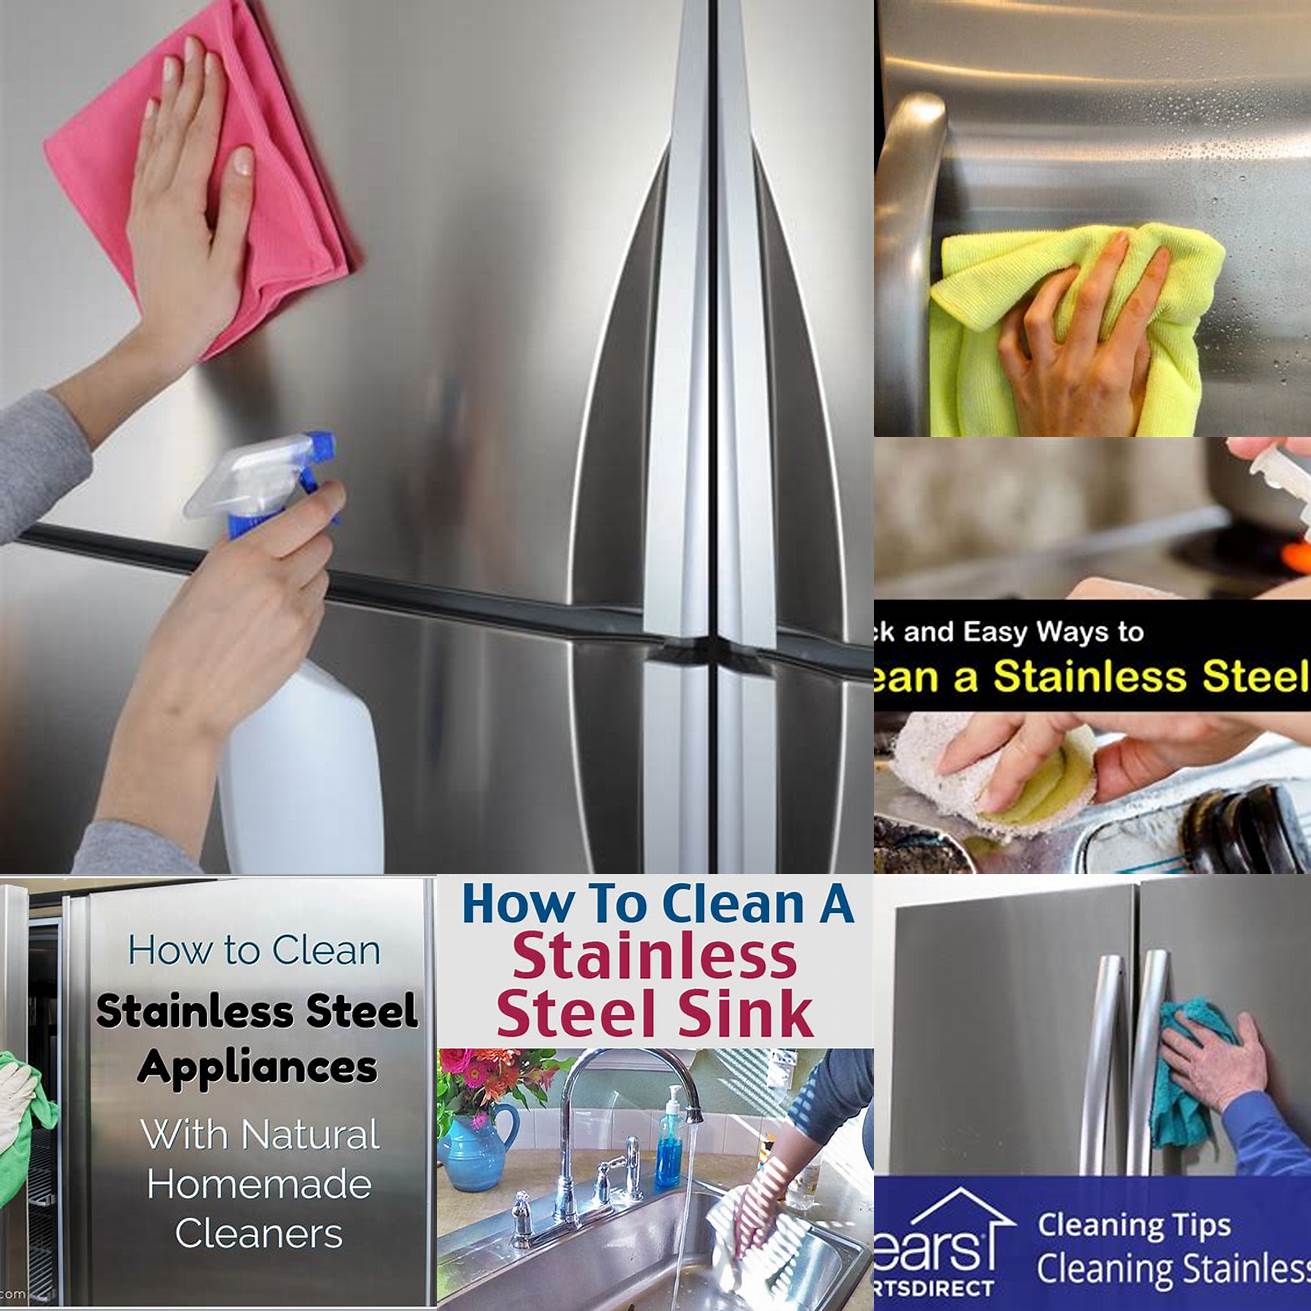 Easy to Clean Stainless steel is a non-porous material that resists stains and bacteria growth Its also easy to clean and maintain making it a hygienic choice for the kitchen